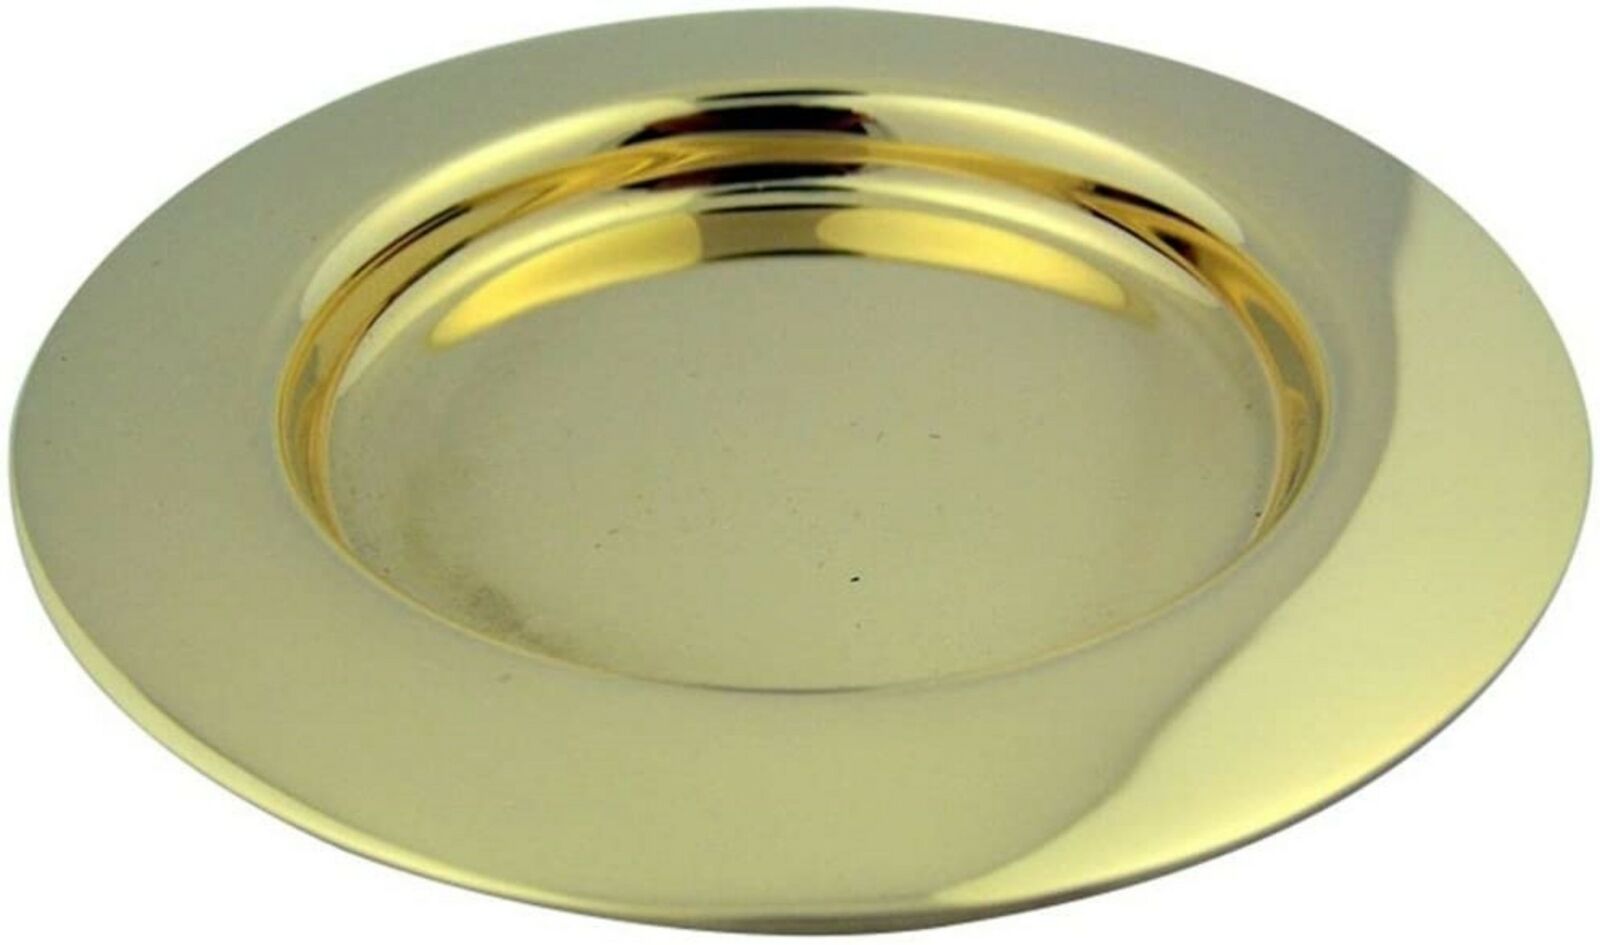 N.g. High Polished Brass Replacement Paten For Church Use, 3 Inch